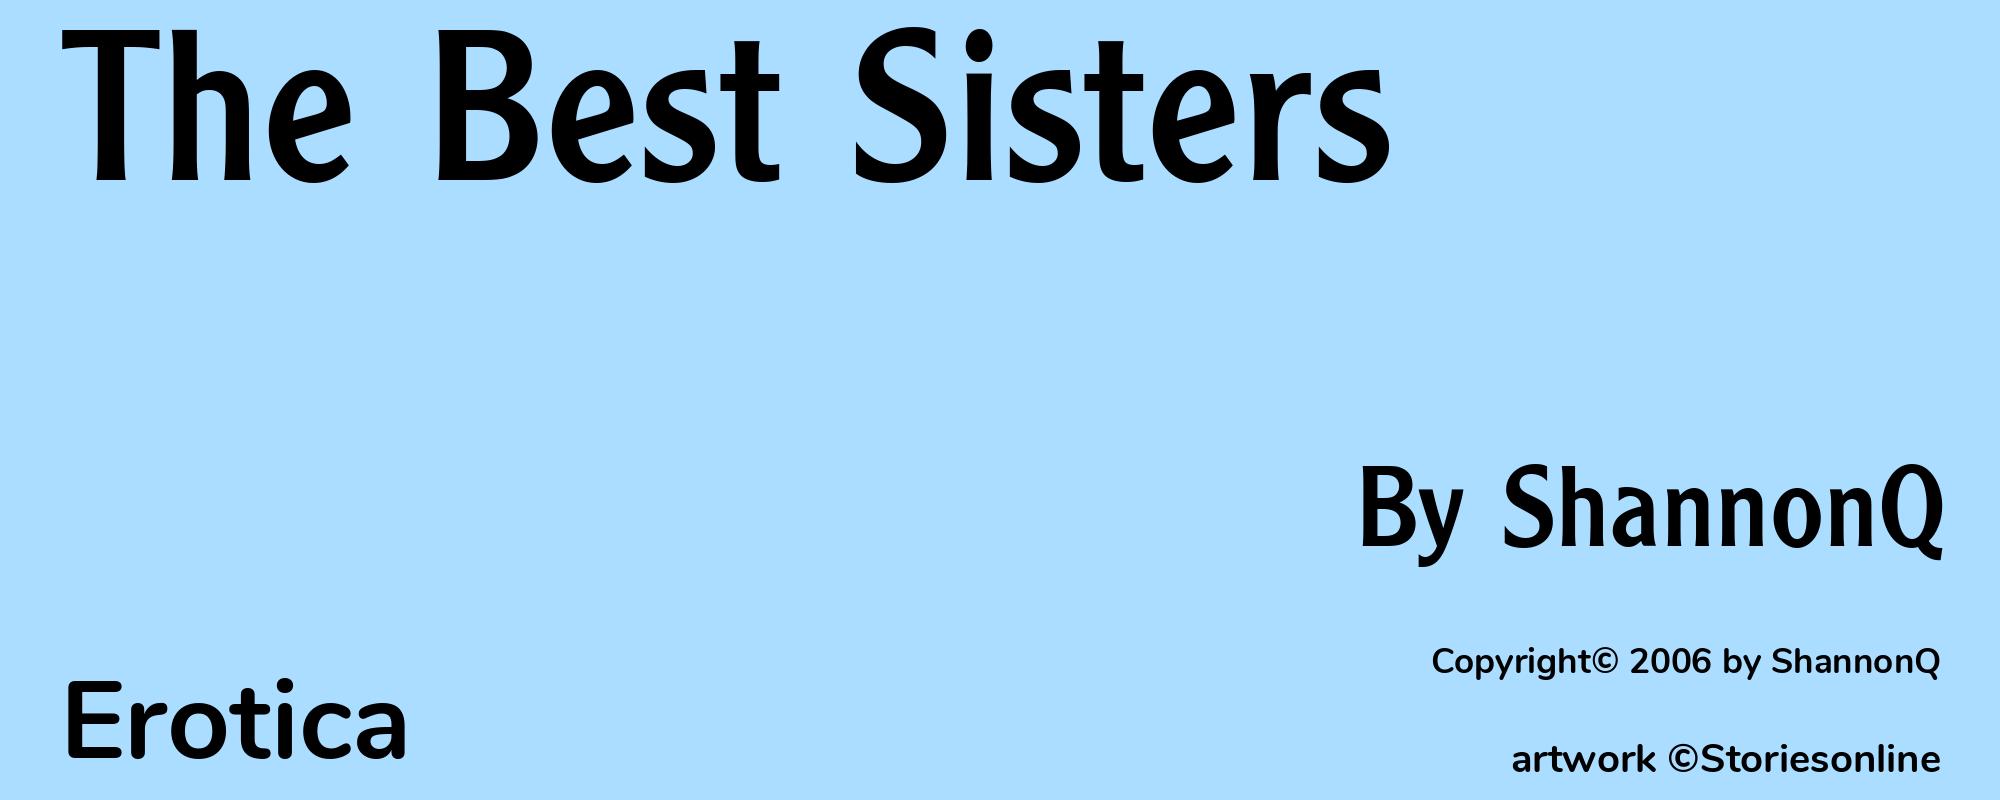 The Best Sisters - Cover